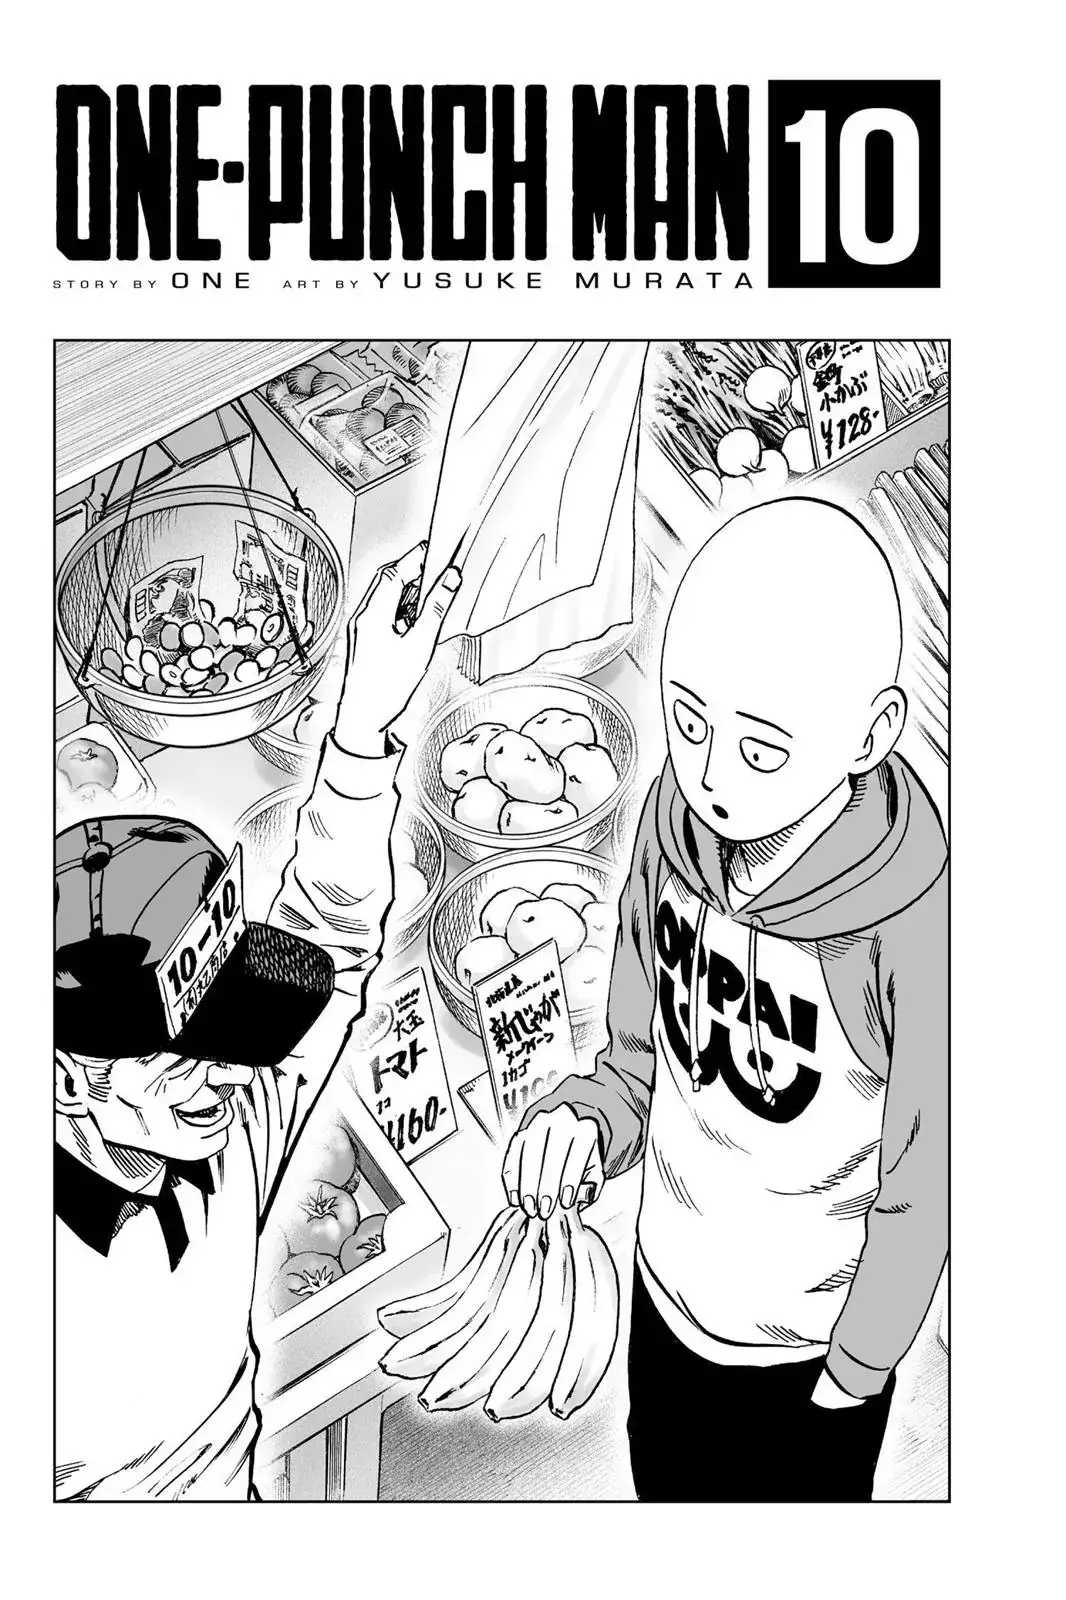 One Punch Man Chapter 48, READ One Punch Man Chapter 48 ONLINE, lost in the cloud genre,lost in the cloud gif,lost in the cloud girl,lost in the cloud goods,lost in the cloud goodreads,lost in the cloud,lost ark cloud gaming,lost odyssey cloud gaming,lost in the cloud fanart,lost in the cloud fanfic,lost in the cloud fandom,lost in the cloud first kiss,lost in the cloud font,lost in the cloud ending,lost in the cloud episode 97,lost in the cloud edit,lost in the cloud explained,lost in the cloud dog,lost in the cloud discord server,lost in the cloud desktop wallpaper,lost in the cloud drawing,can't find my cloud on network,lost in the cloud characters,lost in the cloud chapter 93 release date,lost in the cloud birthday,lost in the cloud birthday art,lost in the cloud background,lost in the cloud banner,lost in the clouds meaning,what is the black cloud in lost,lost in the cloud ao3,lost in the cloud anime,lost in the cloud art,lost in the cloud author twitter,lost in the cloud author instagram,lost in the cloud artist,lost in the cloud acrylic stand,lost in the cloud artist twitter,lost in the cloud art style,lost in the cloud analysis